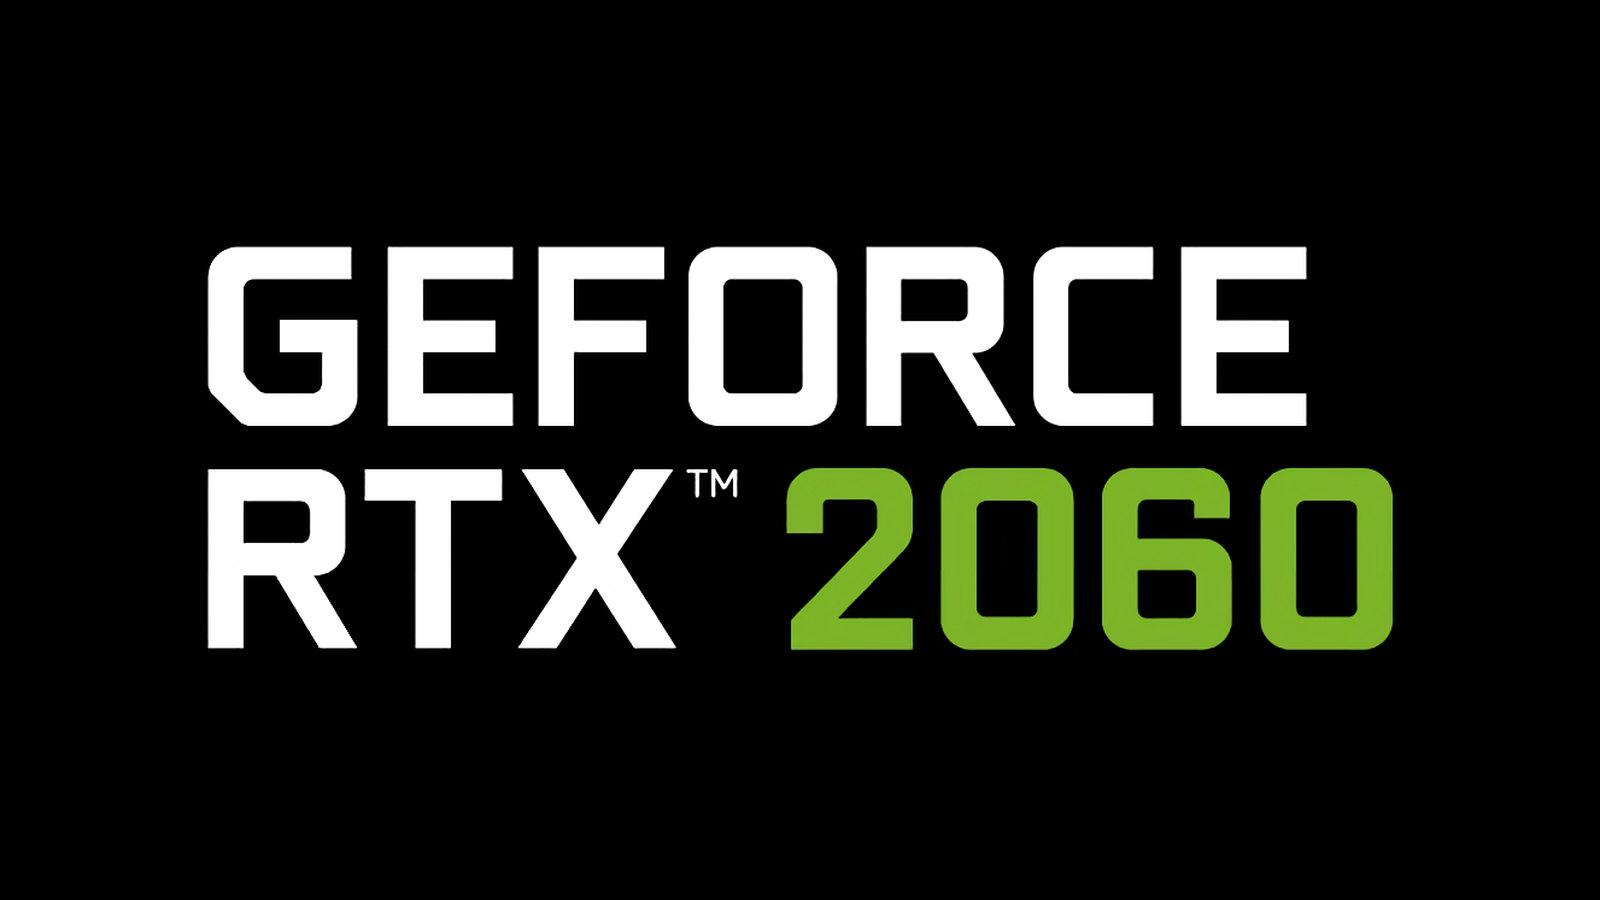 I made a GeForce RTX wallpaper! [1920x1080] : r/pcmasterrace